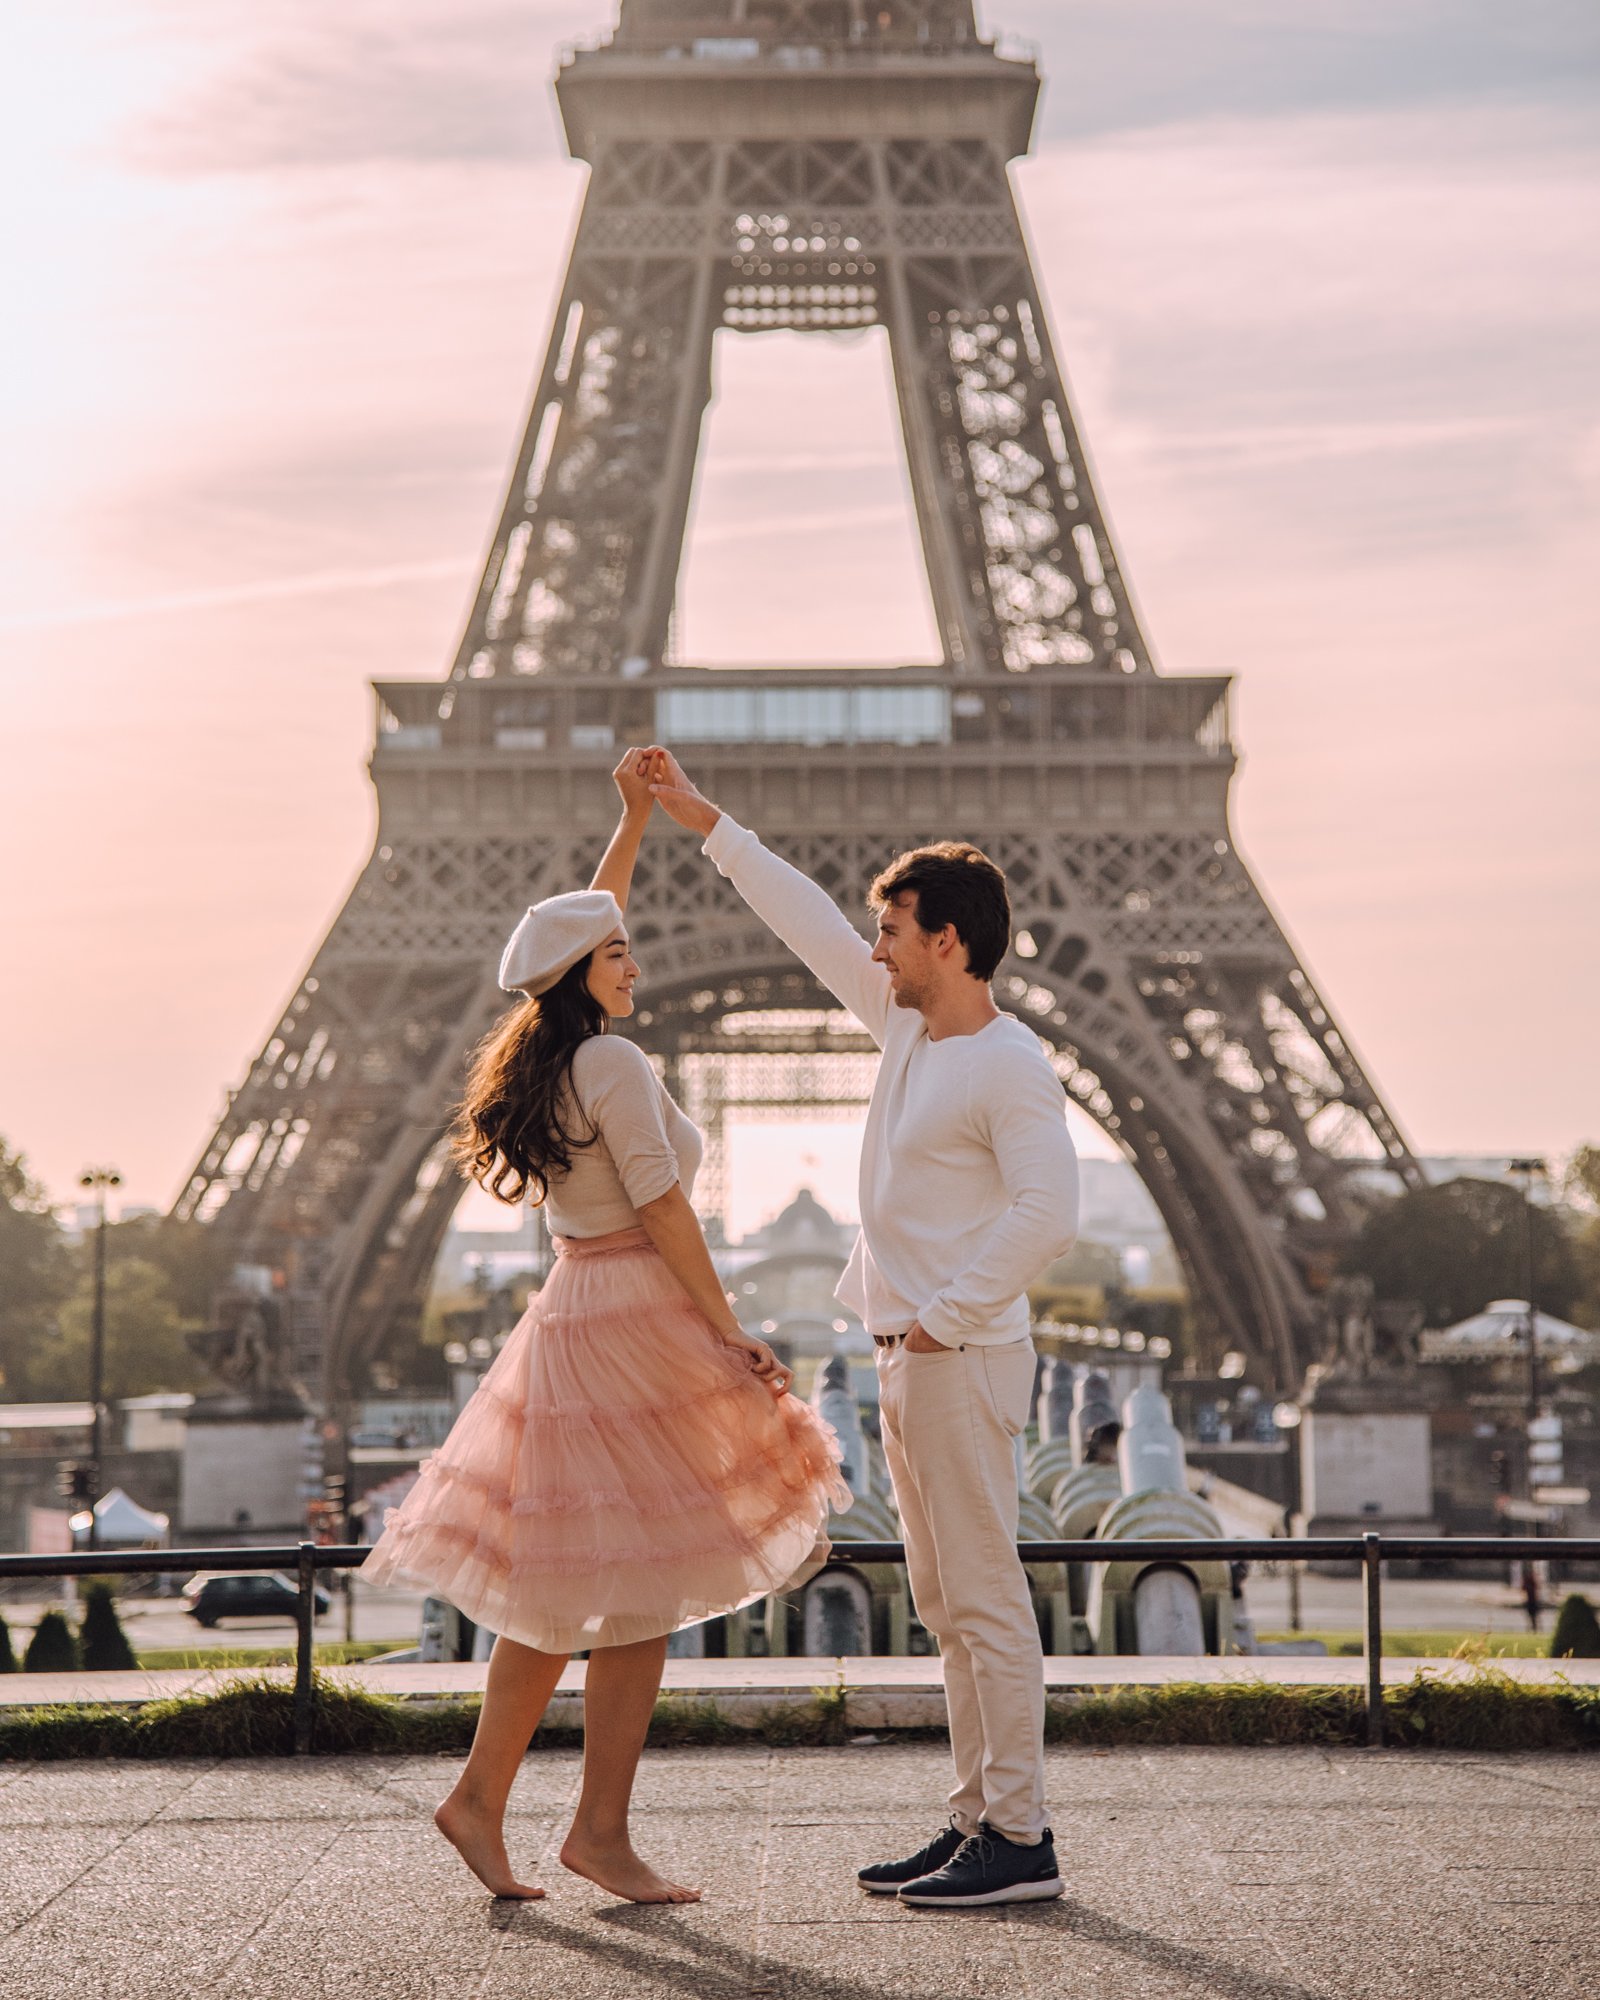 Guy twirls girl in front of the Eiffel Tower in Paris at the Trocadero